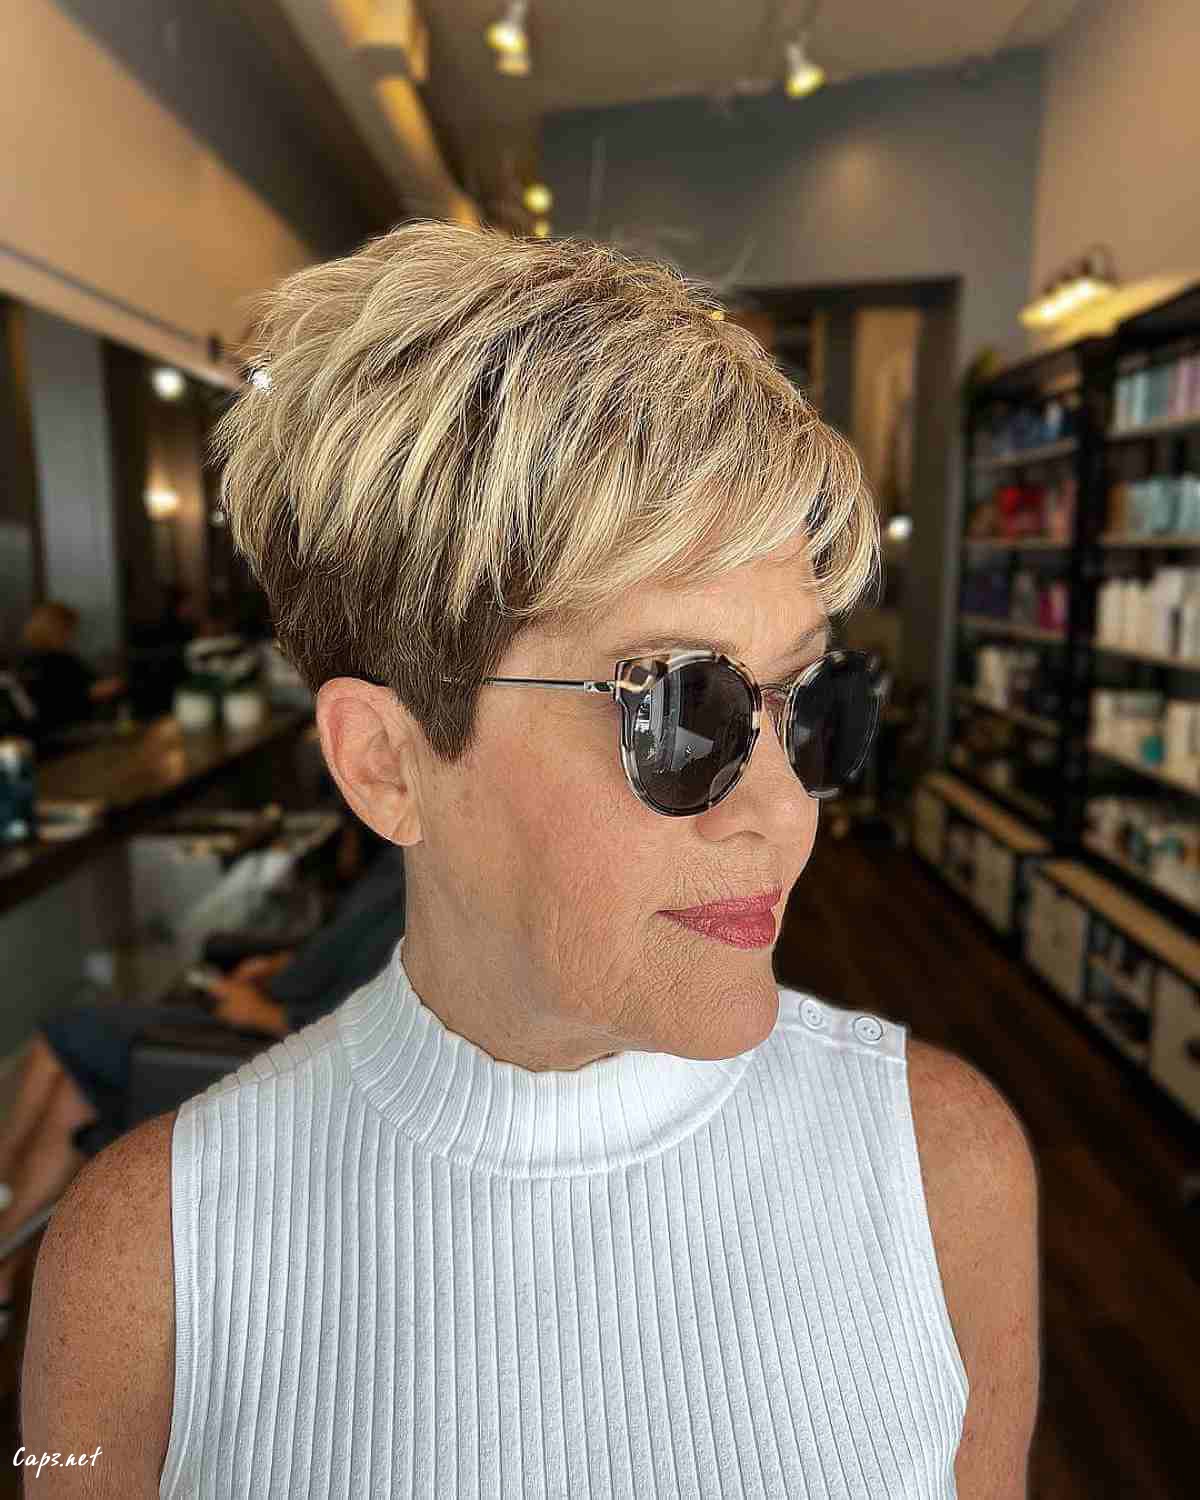 short layered crop cut for women over 60 with glasses